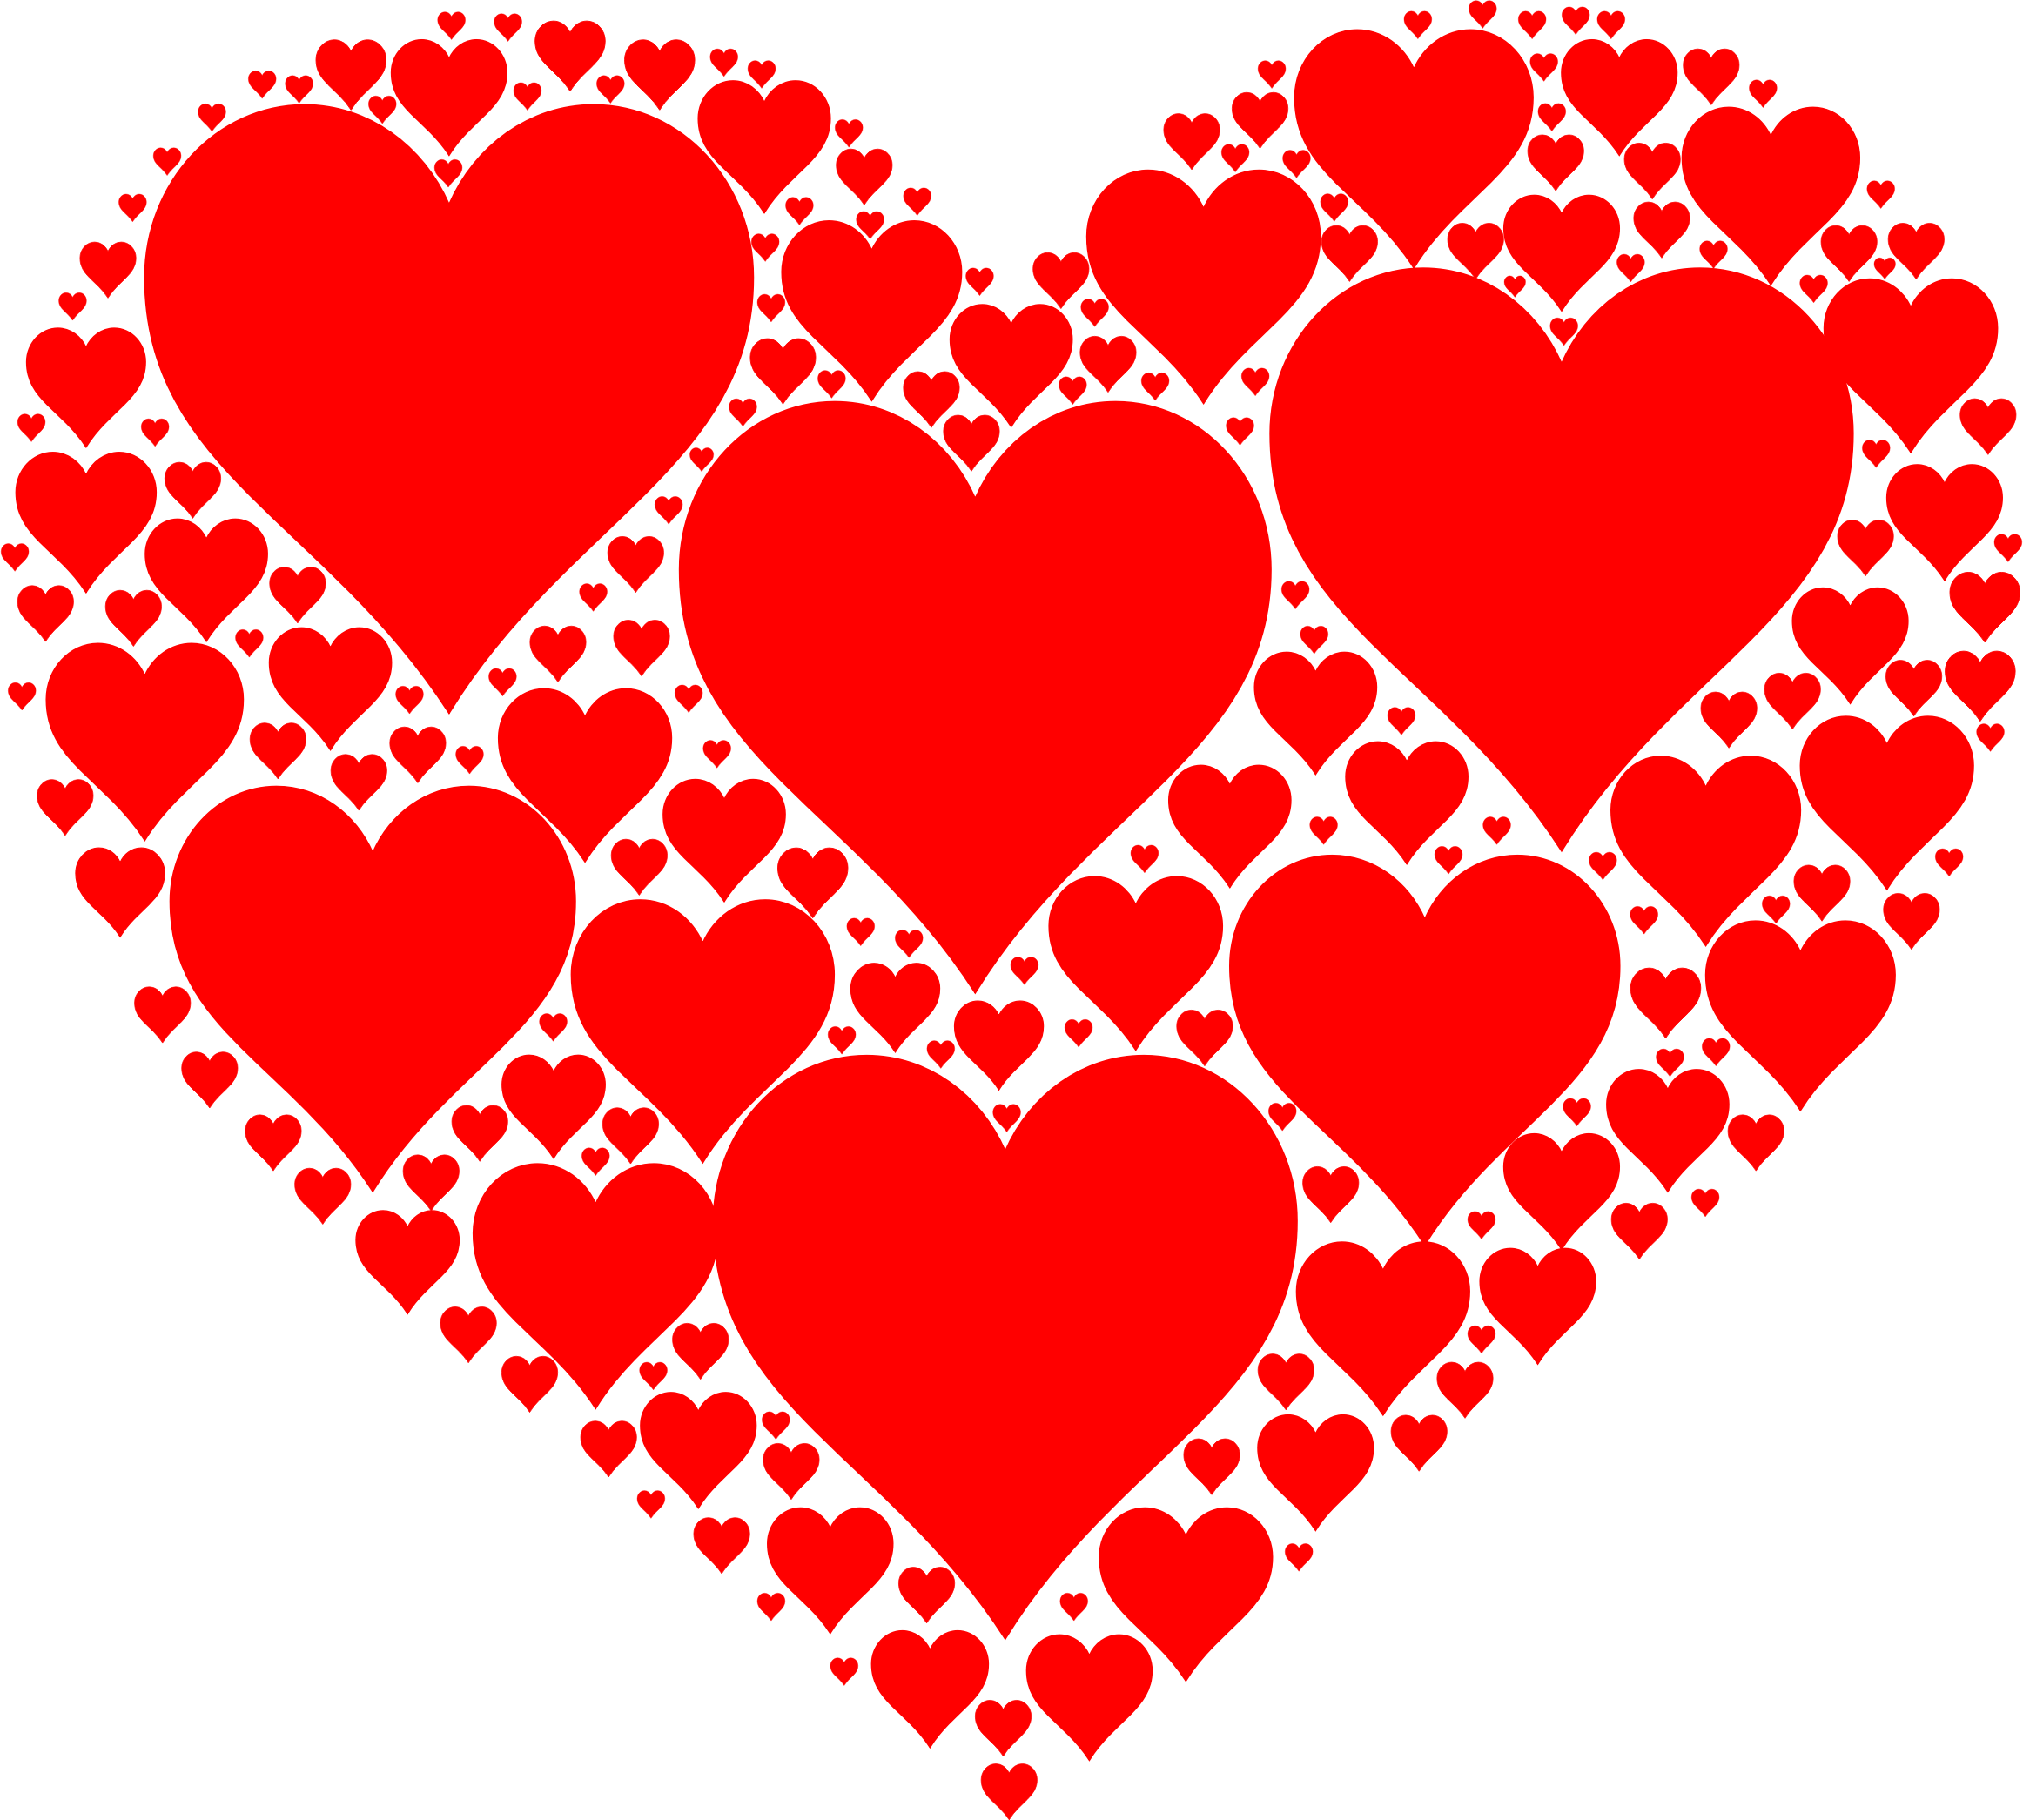 Download Heart in Heart Vector Files image - Free stock photo ...